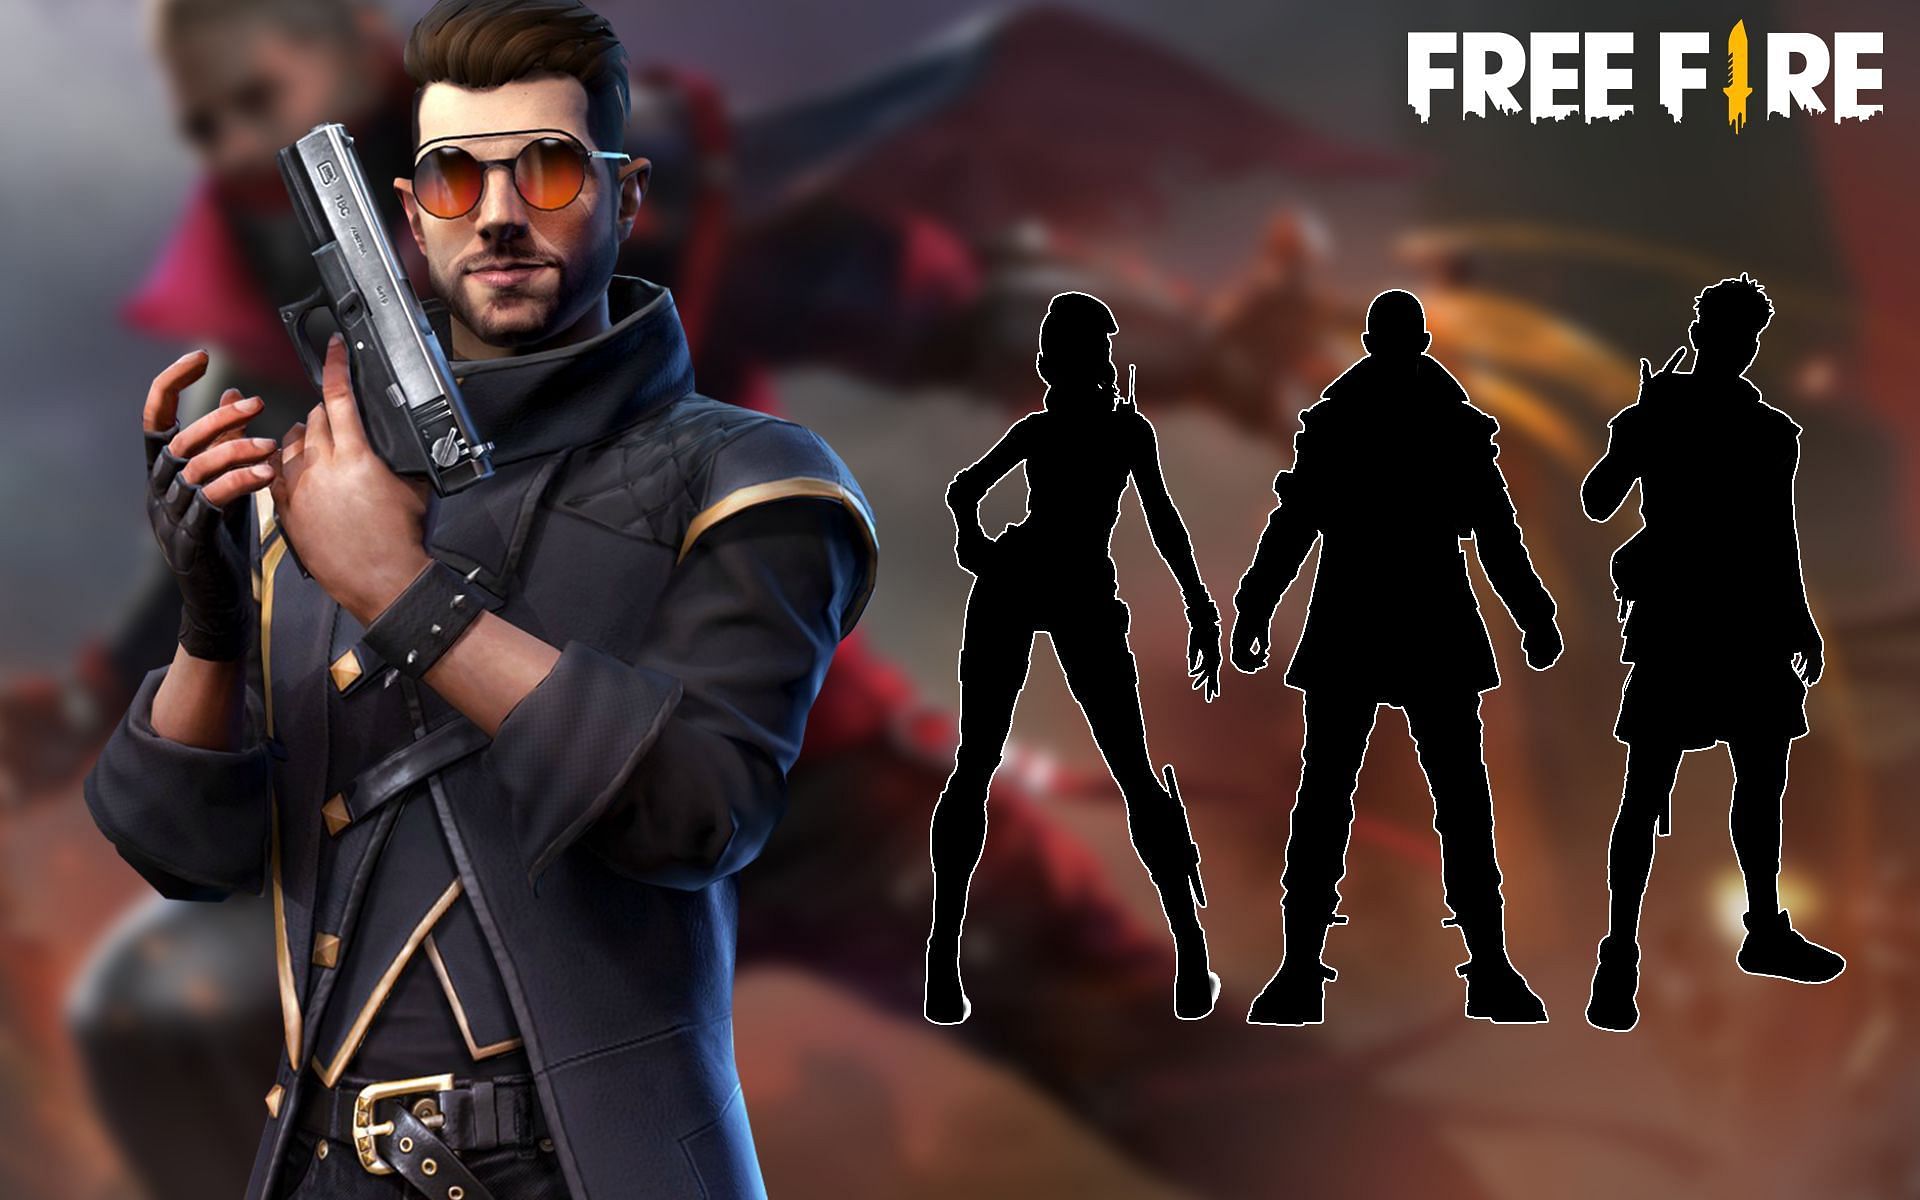 Character combinations are pretty influential in Free Fire (Image via Sportskeeda)